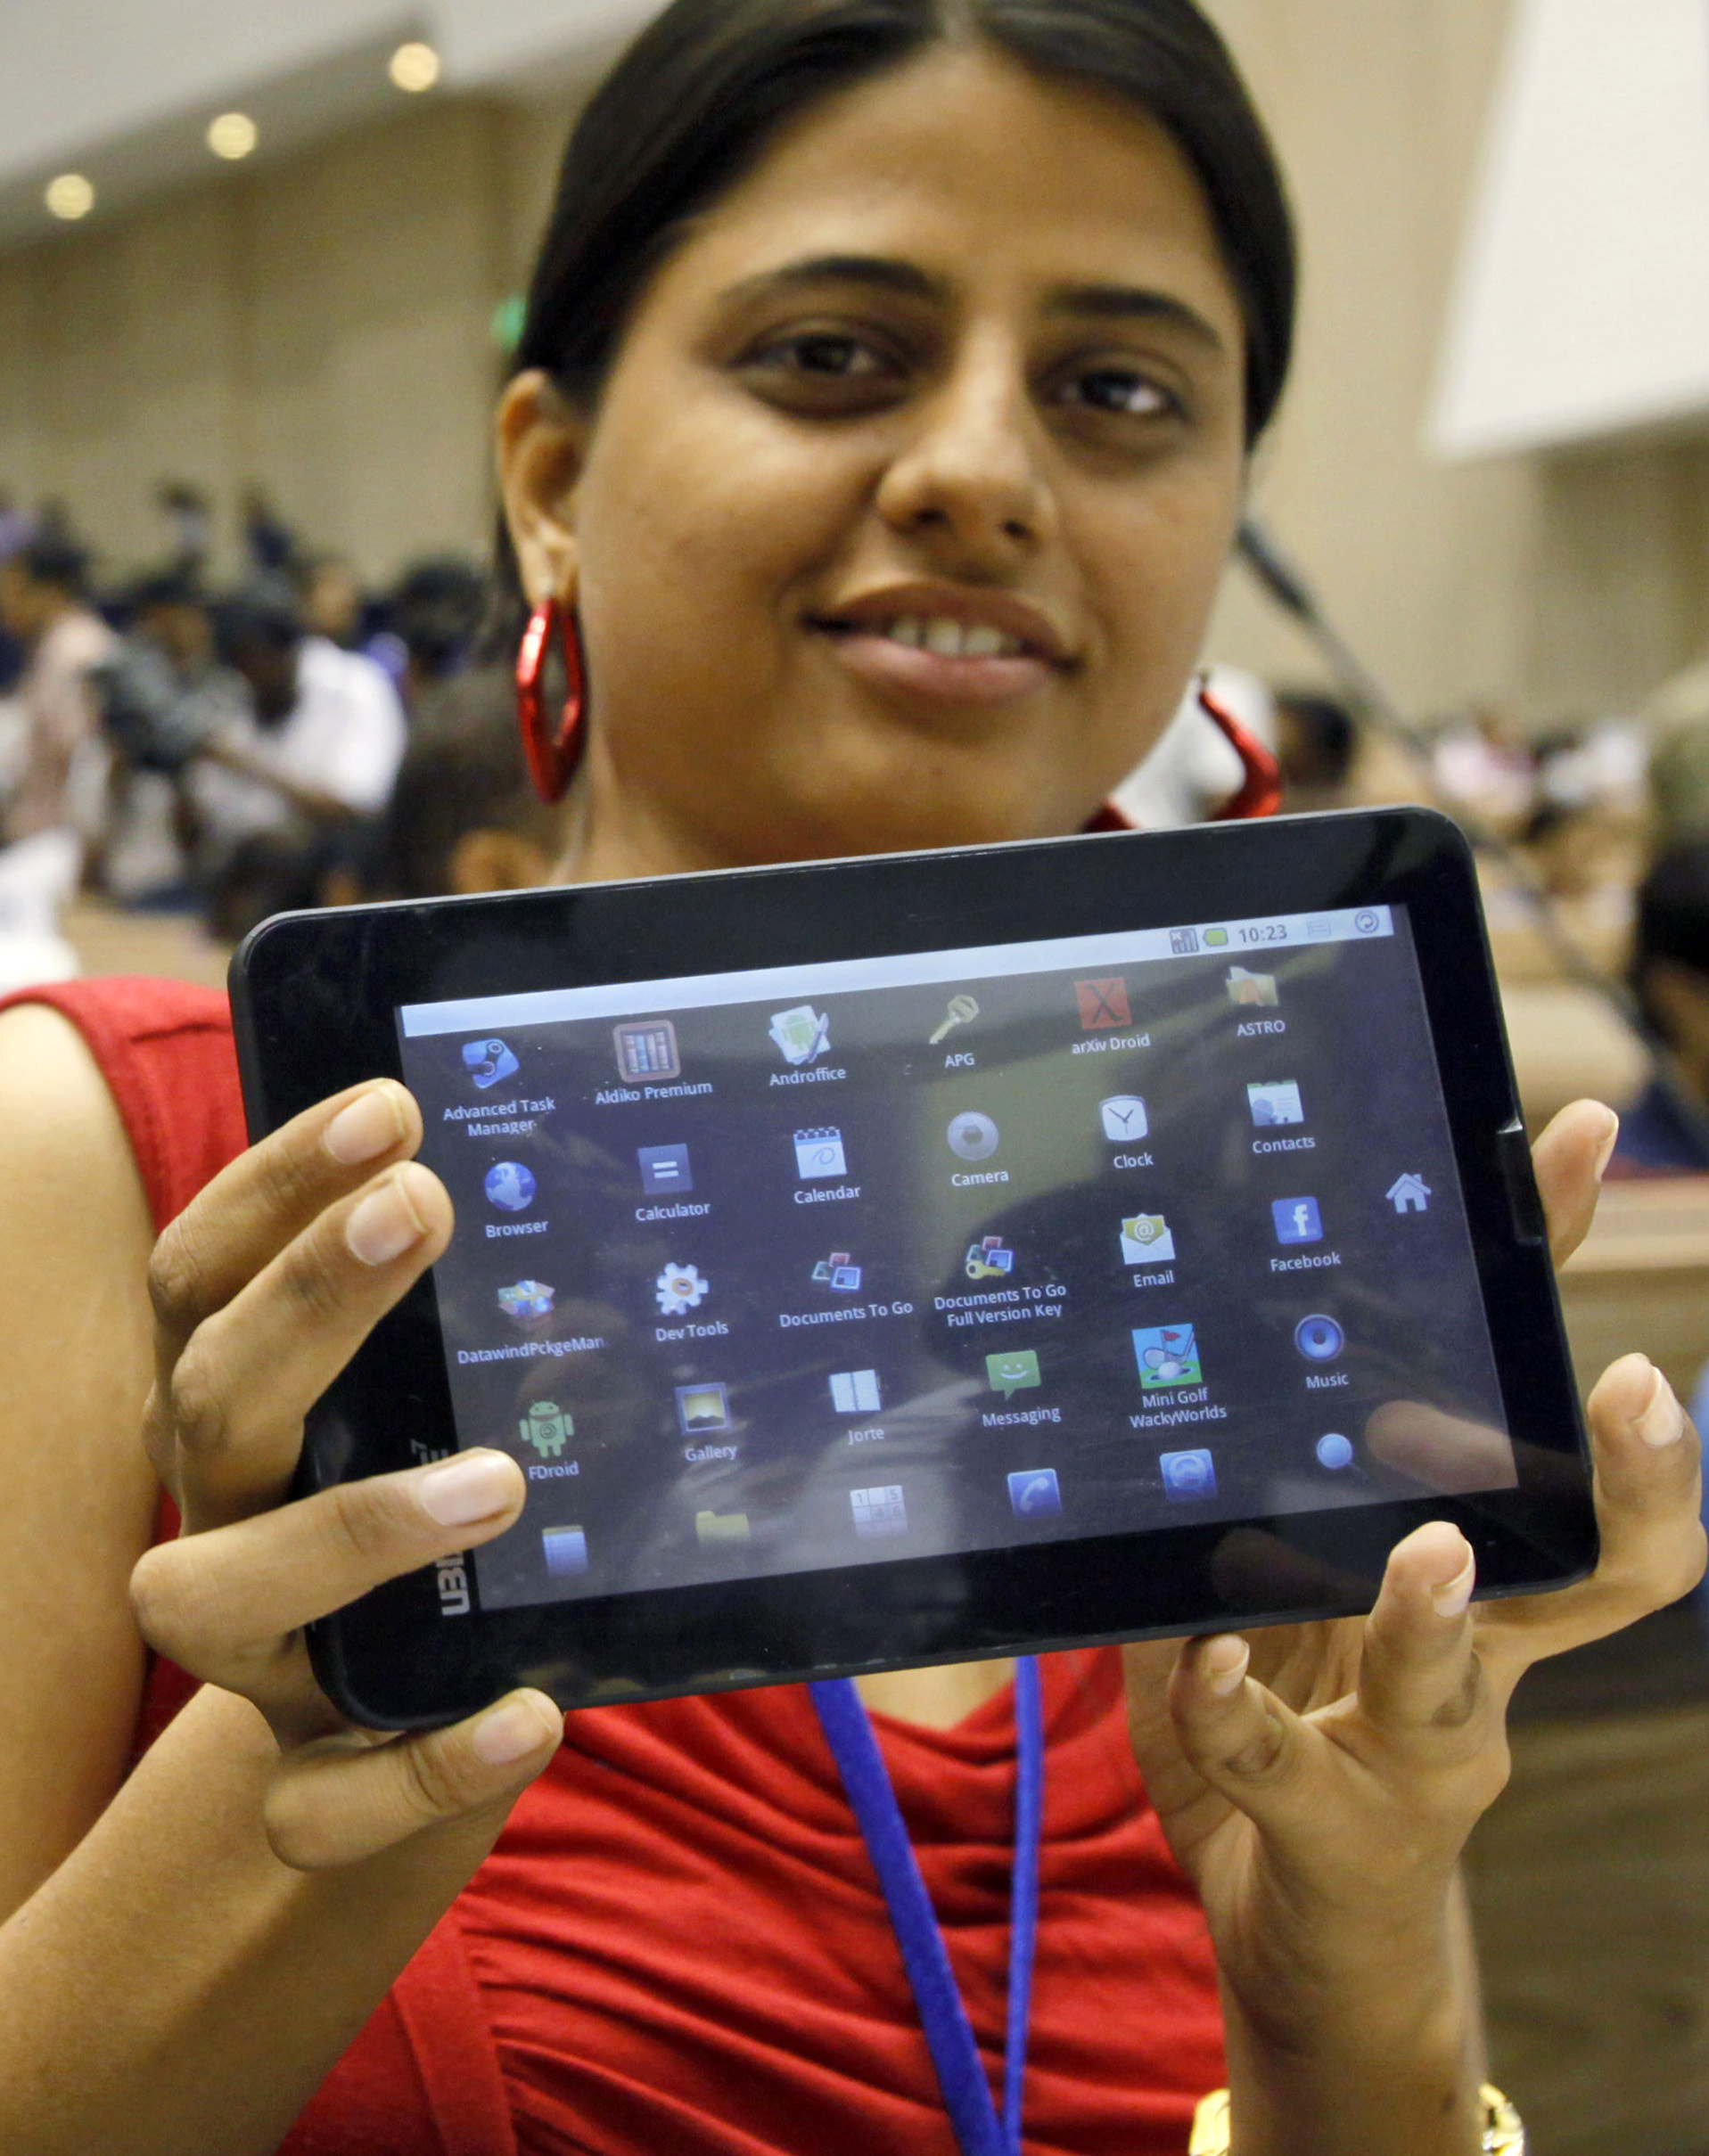 India unveils tablet for poor The SpokesmanReview